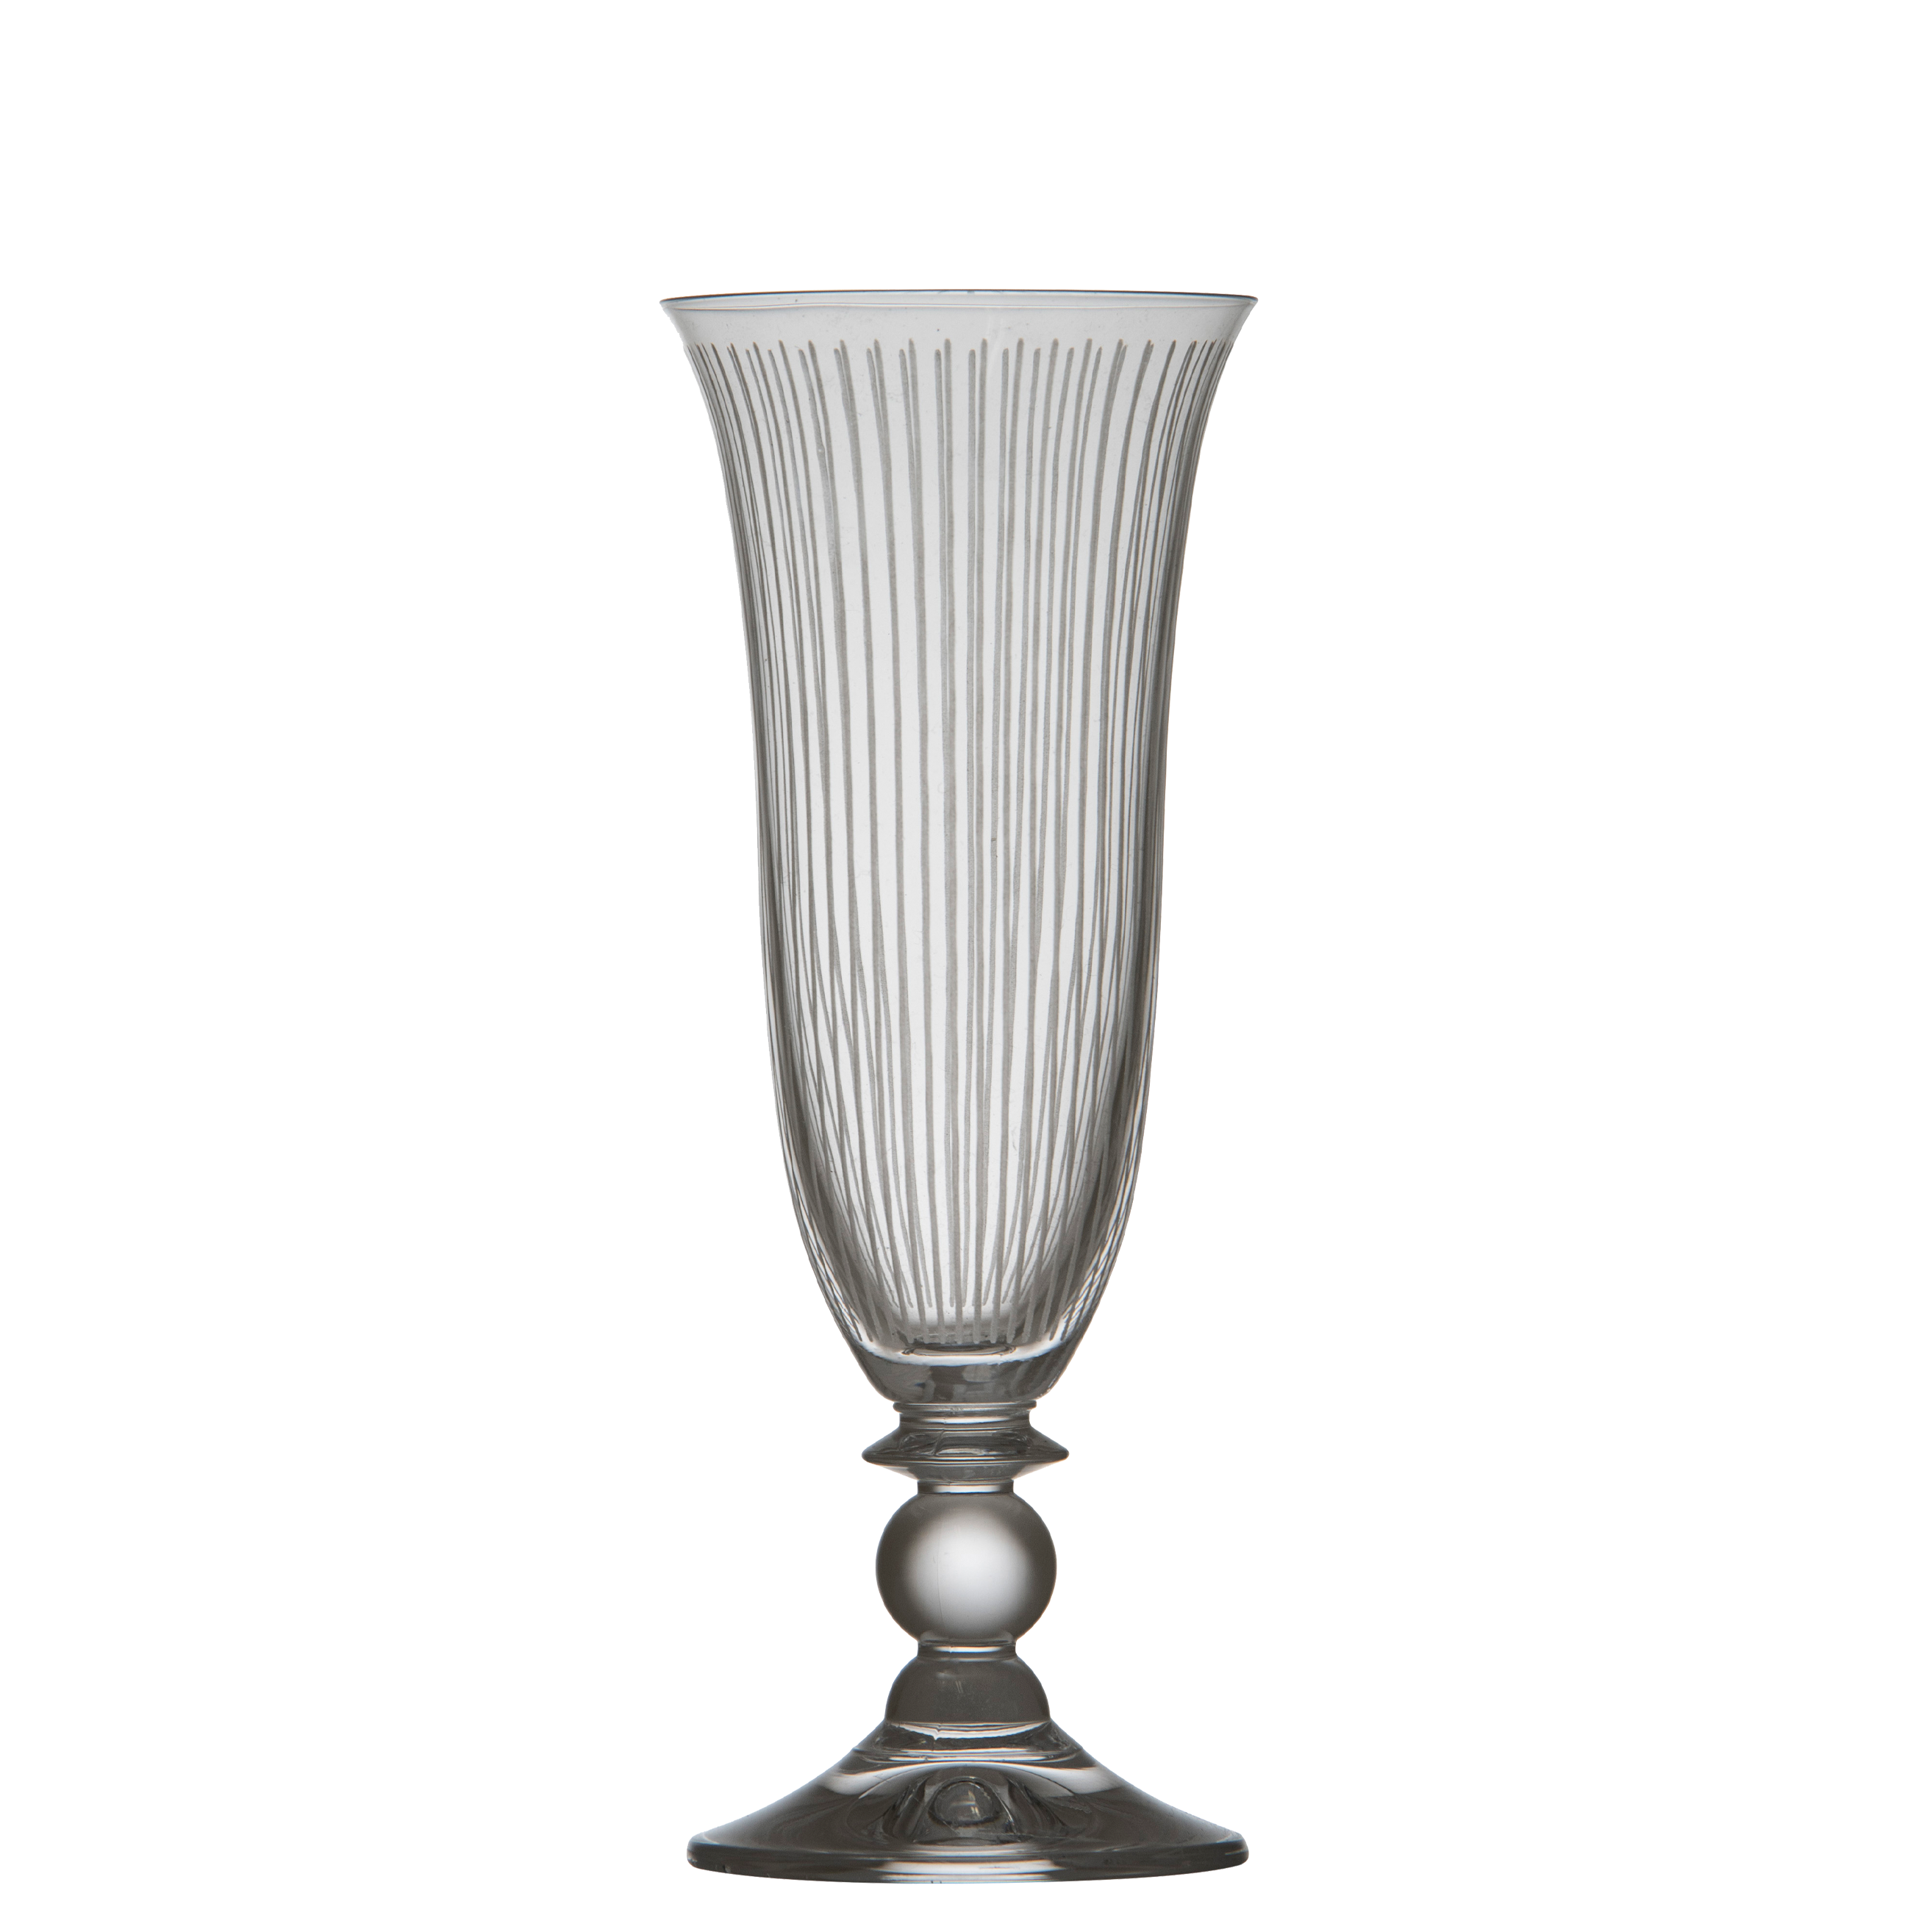 Etched Glasses - Fluted Champagne